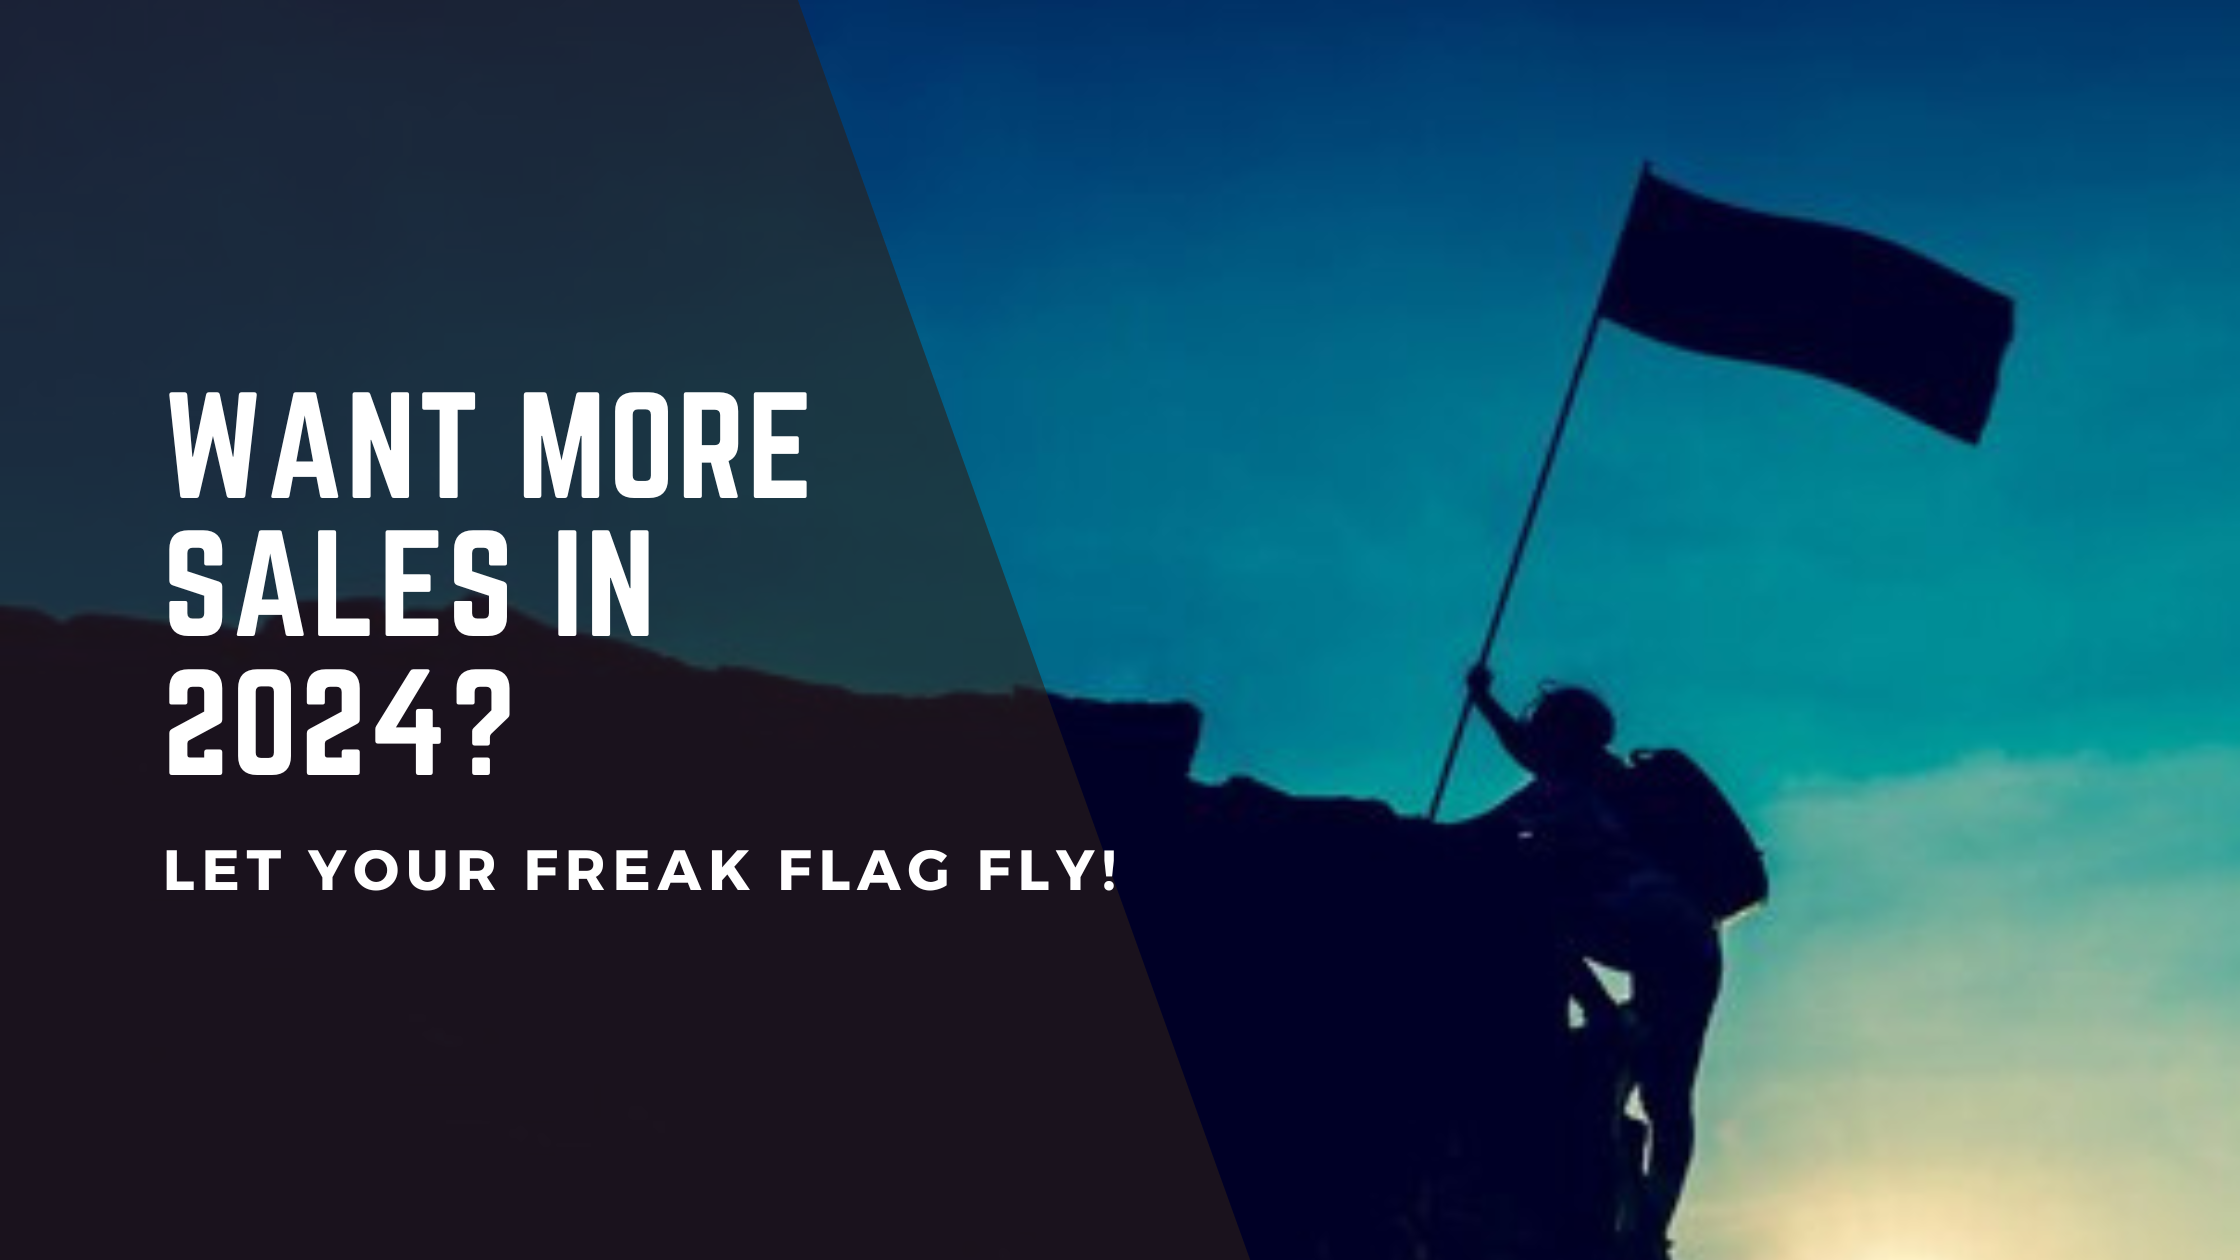 Want More Sales Next Year? Let Your Freak Flag Fly.